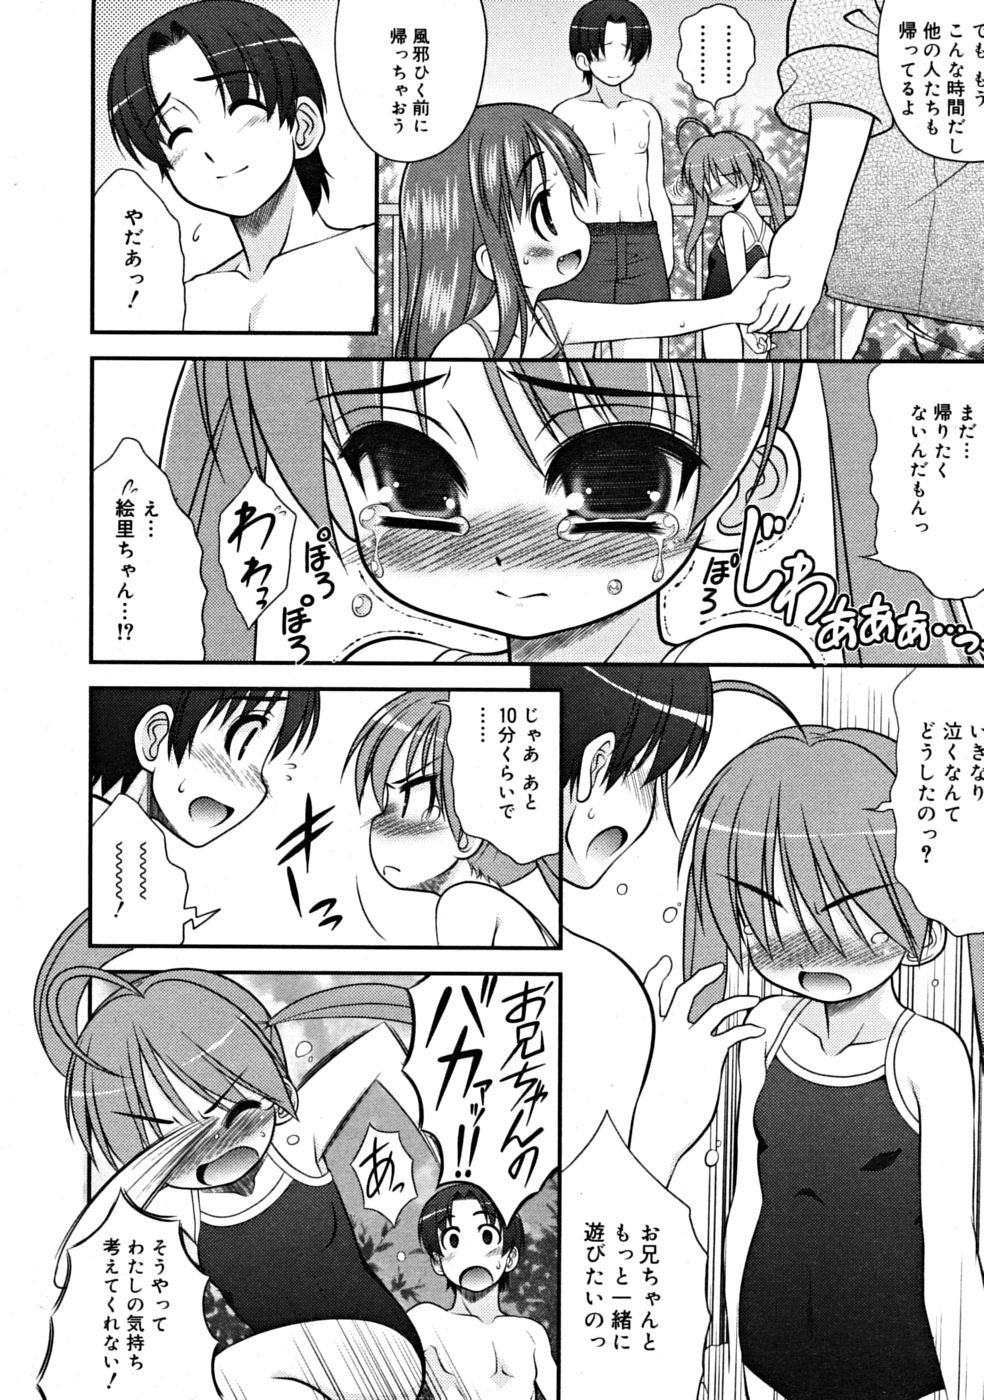 COMIC RiN 2008-09 page 28 full